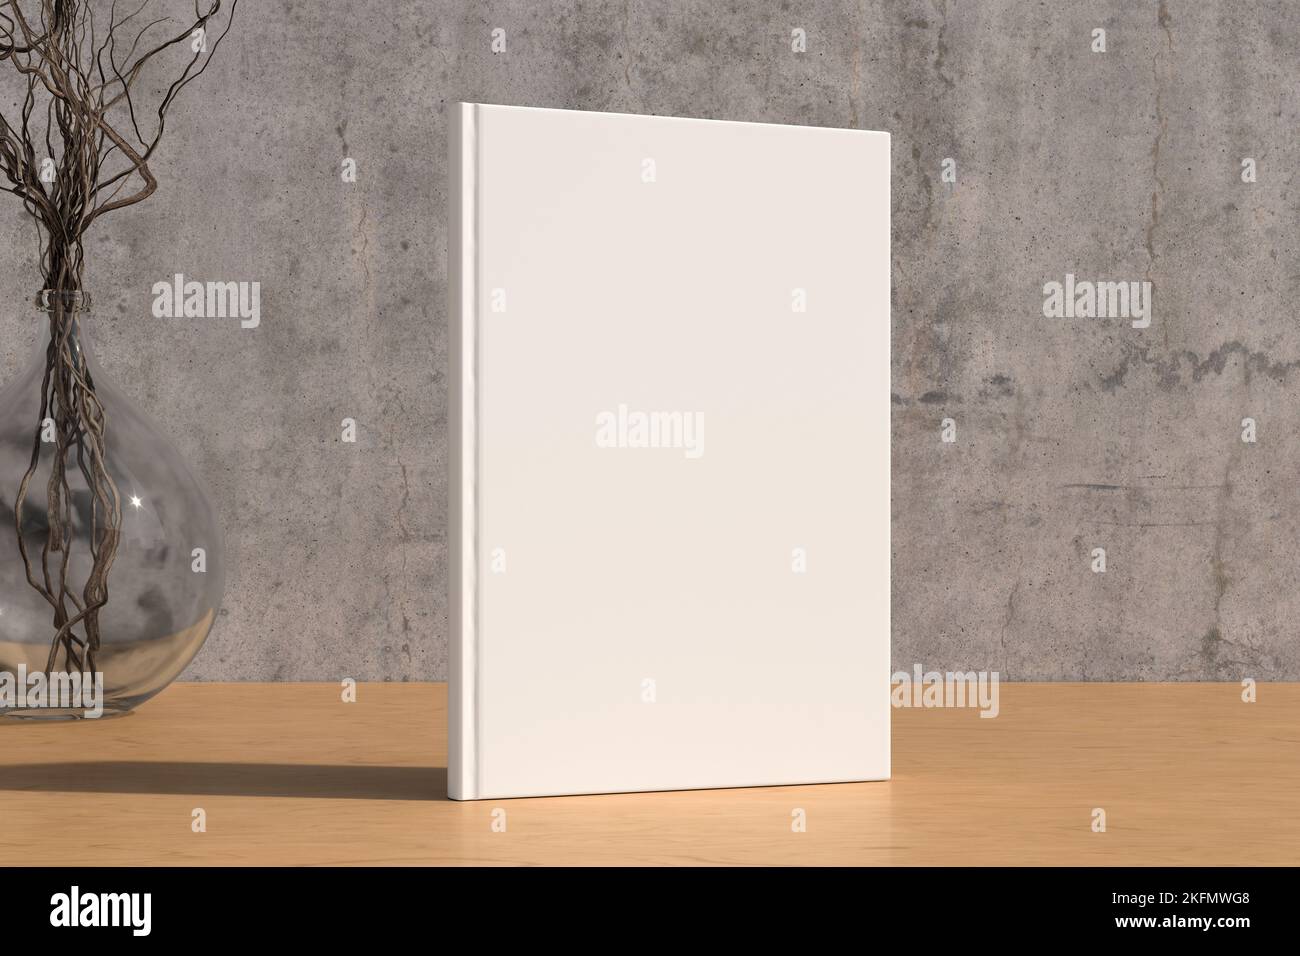 Vertical book cover mock up standing on a wooden desk with concrete wall background Stock Photo